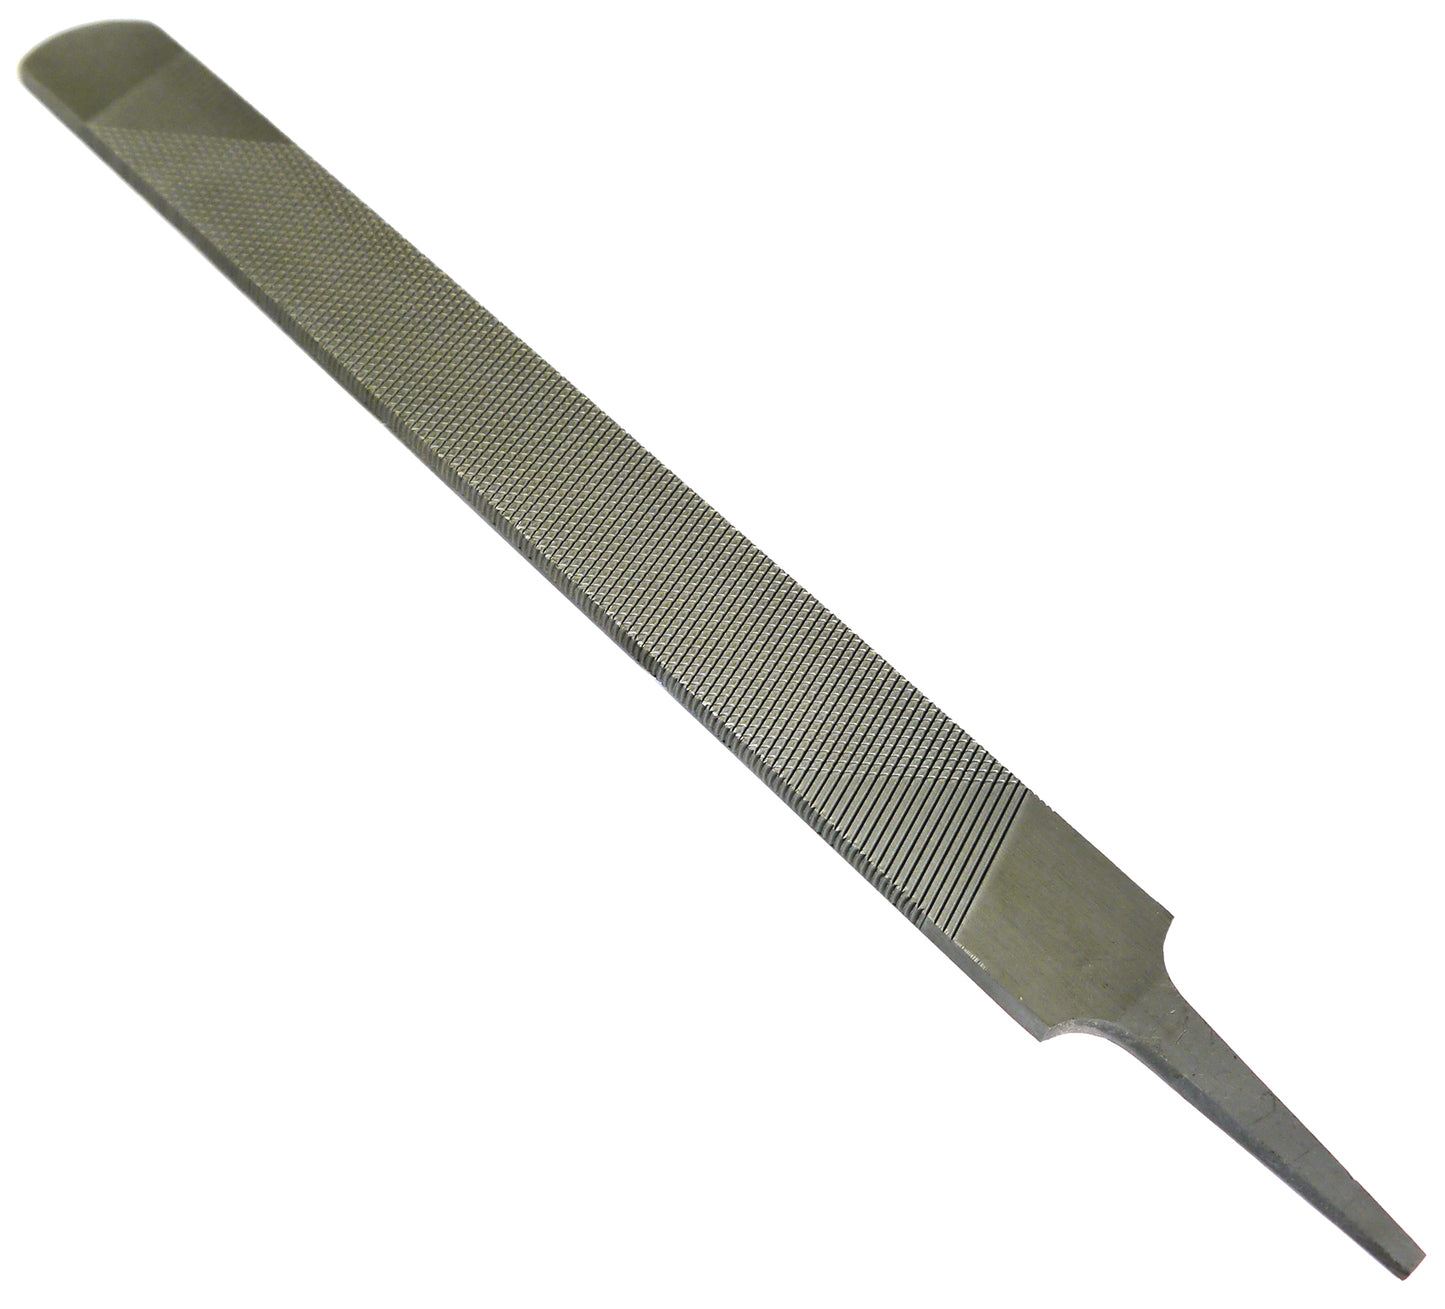 14" Warrensville Horseshoe Rasp with Tang (22726)